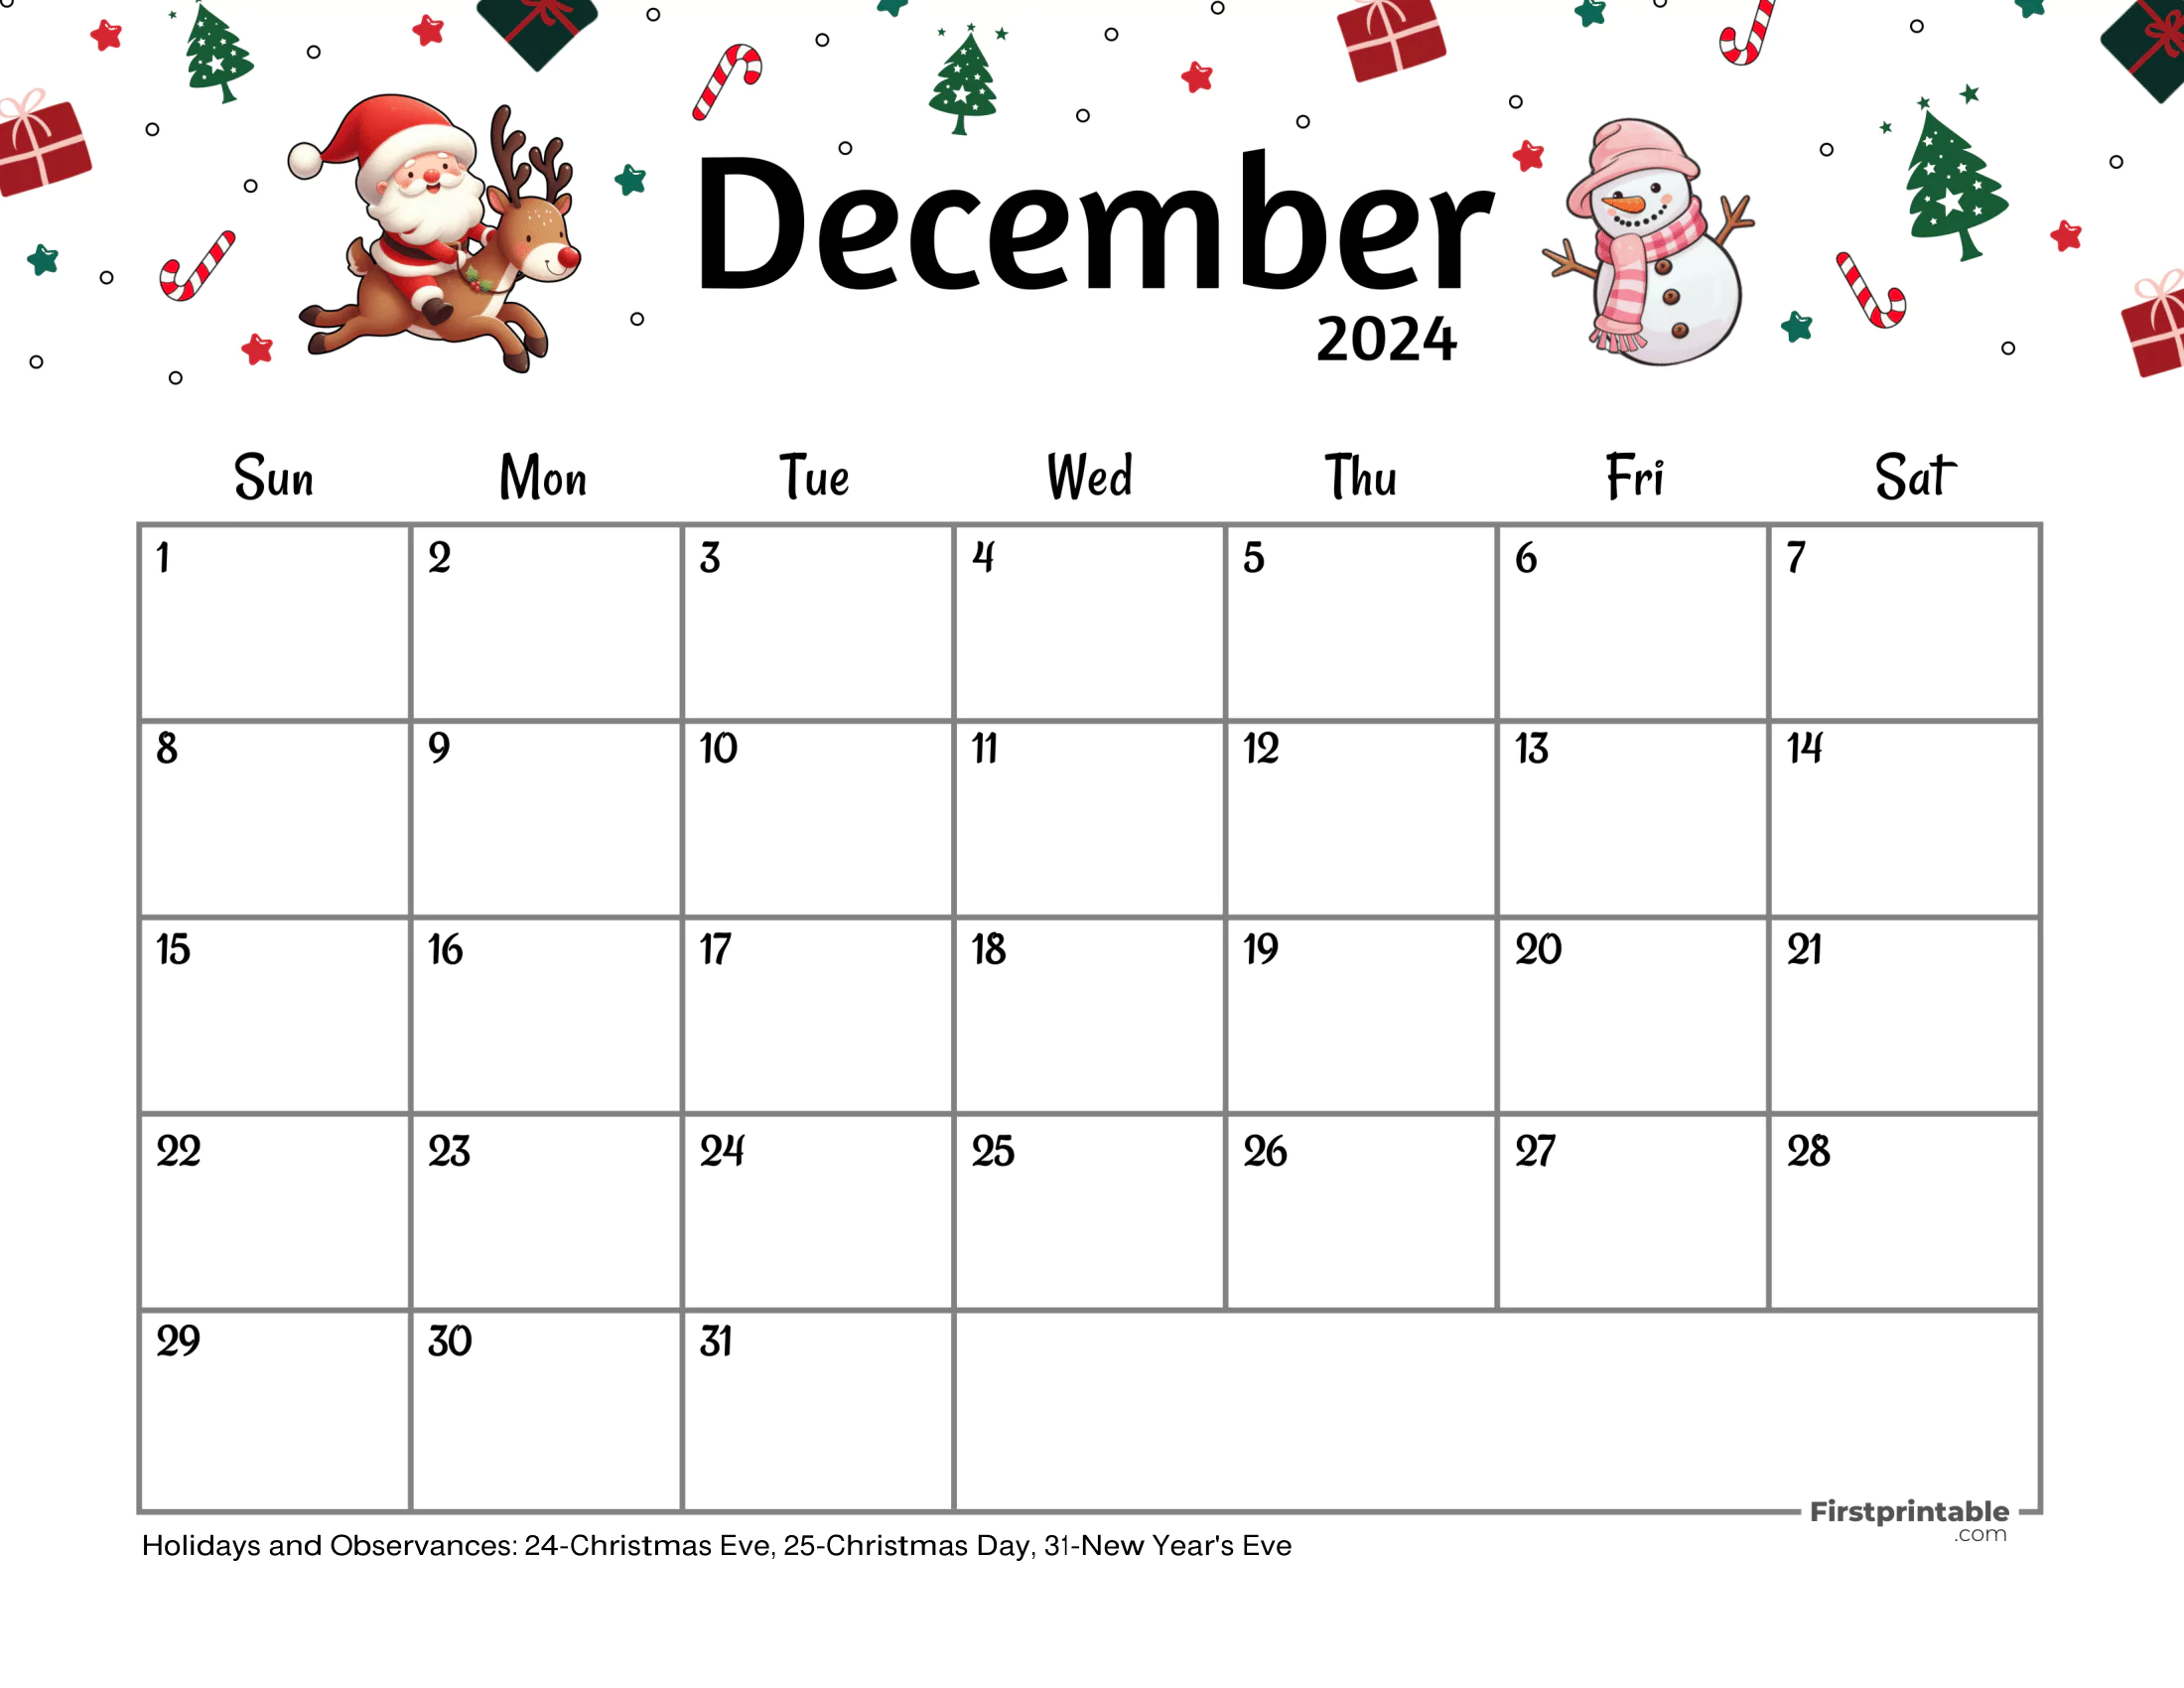 Free Printable & Fillable December Calendar 2024 Fall Themed with US holidays